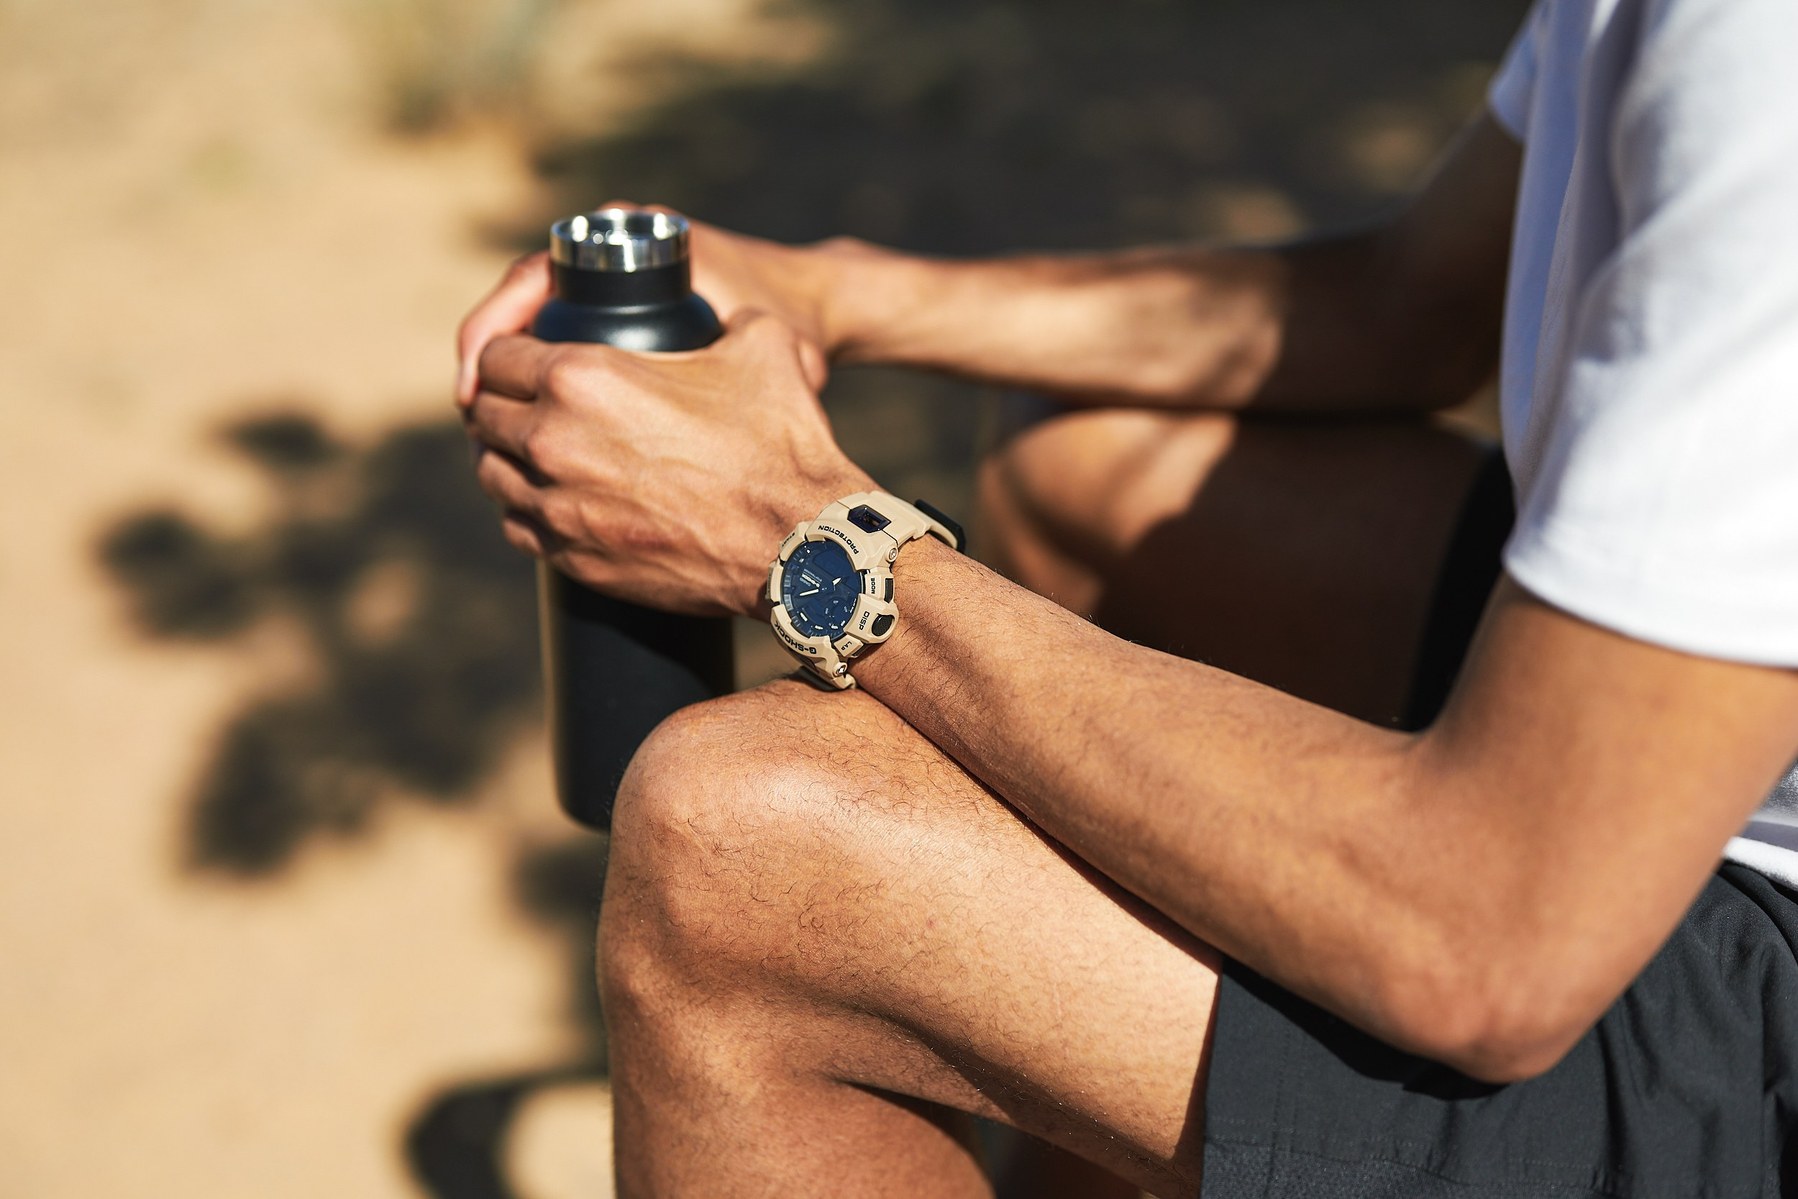 Running in the Colorado mountains with Joseph Gray for Casio G-Shock watches